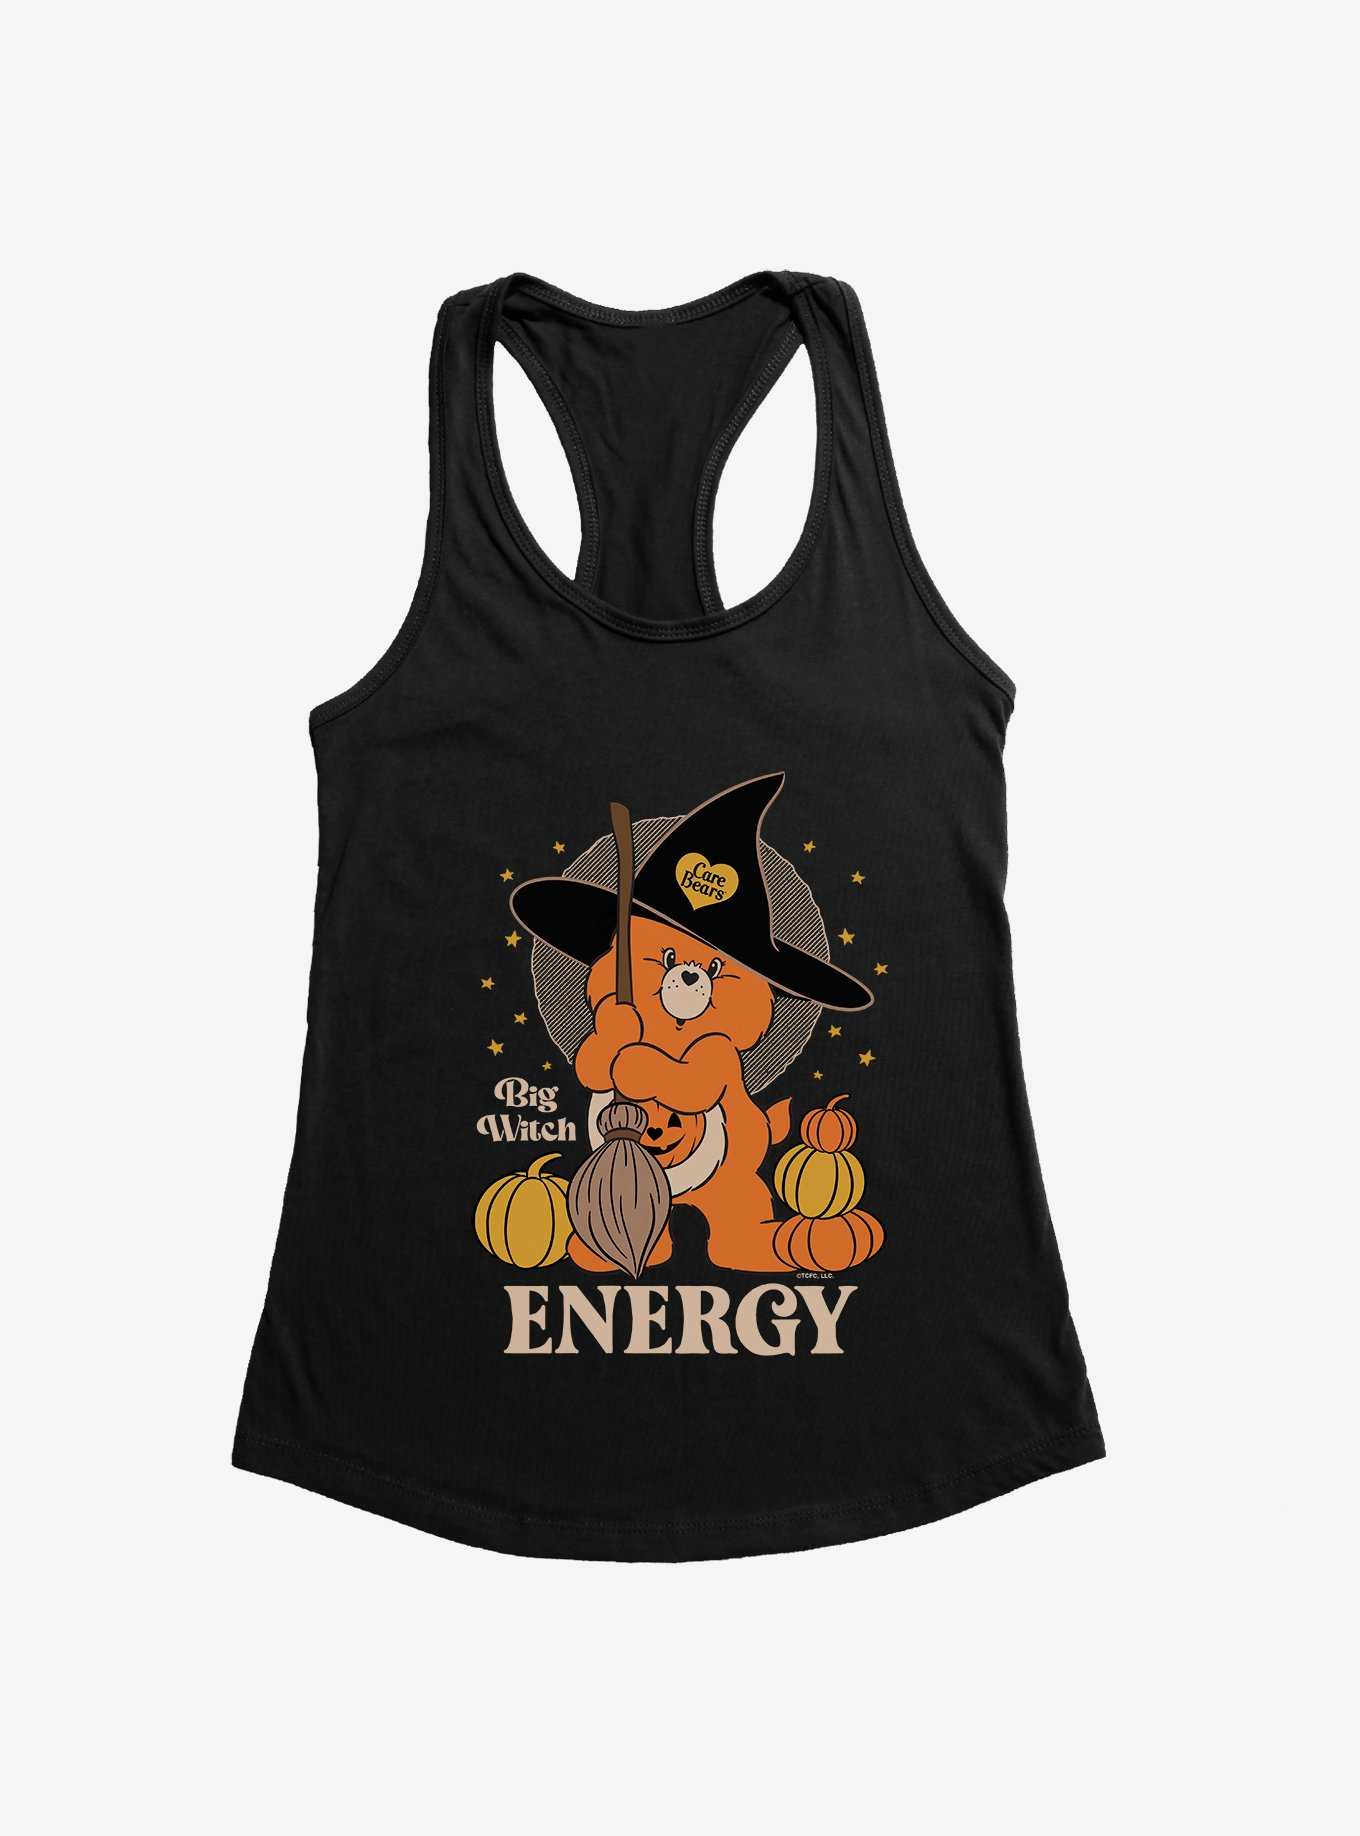 Care Bears Big Witch Energy Girls Tank, , hi-res